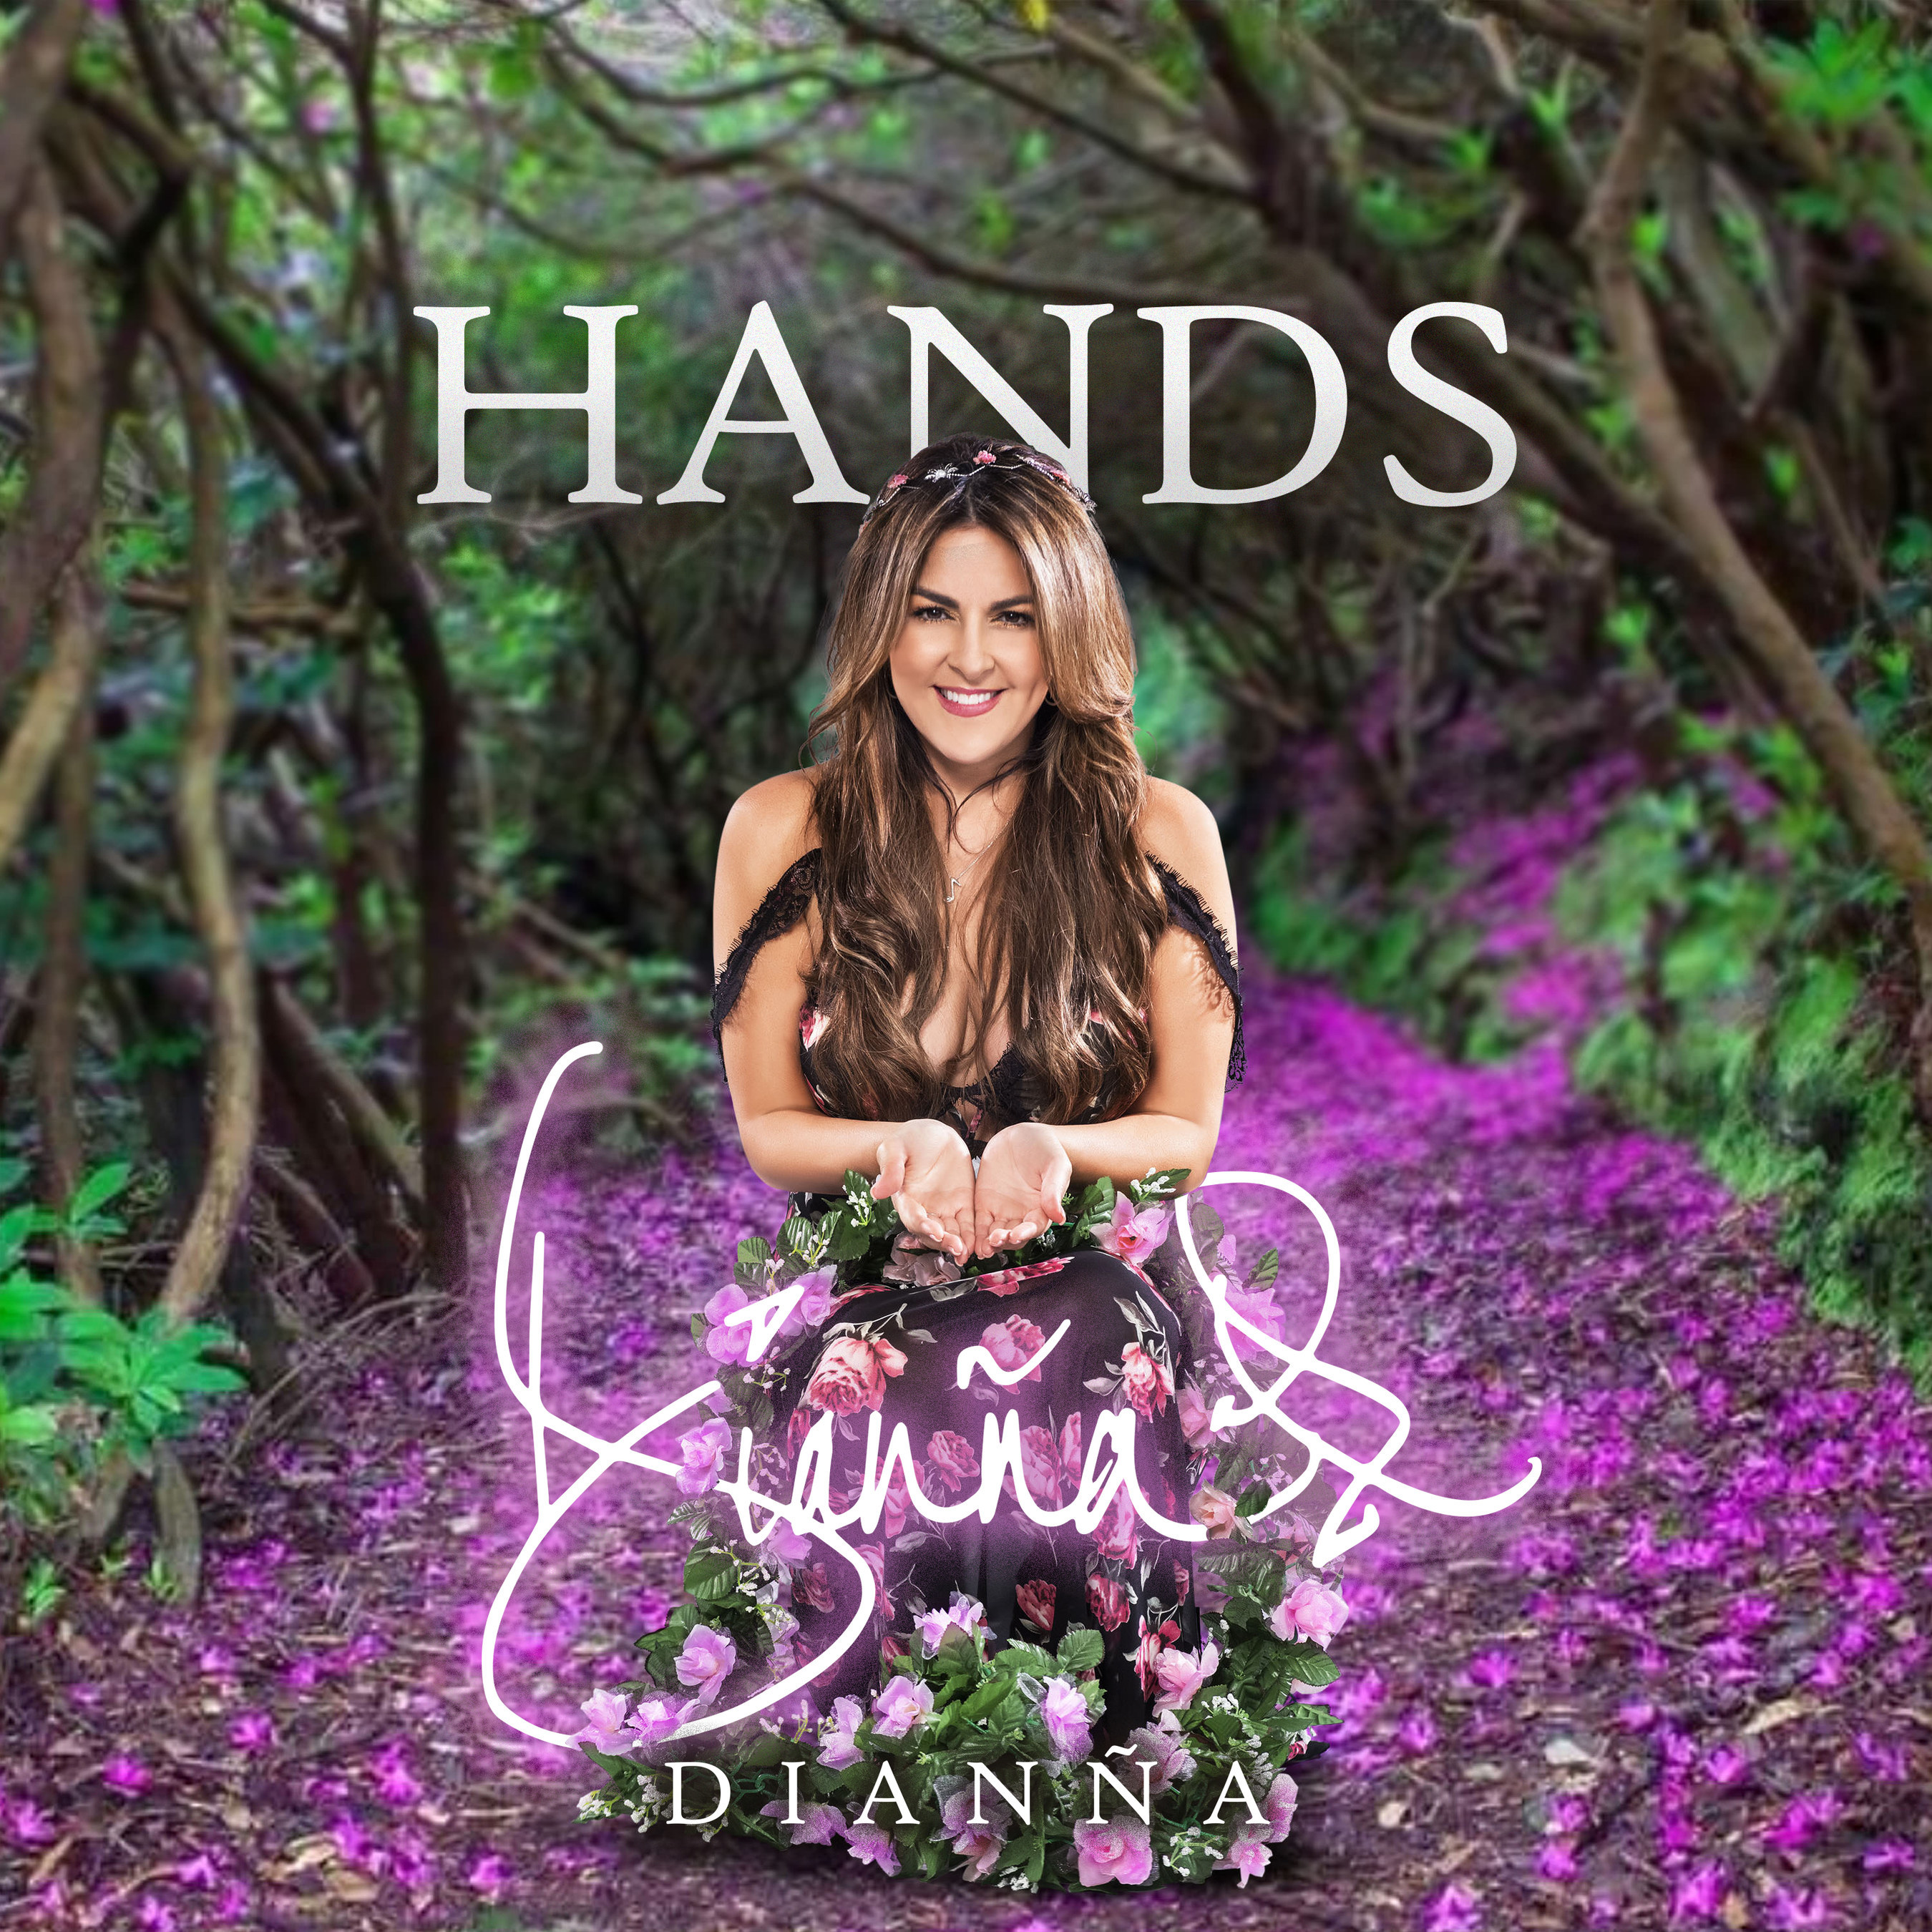 Dianña's new single Hands soars into Billboard TOP 30 Adult Contemporary Chart in only second week of release